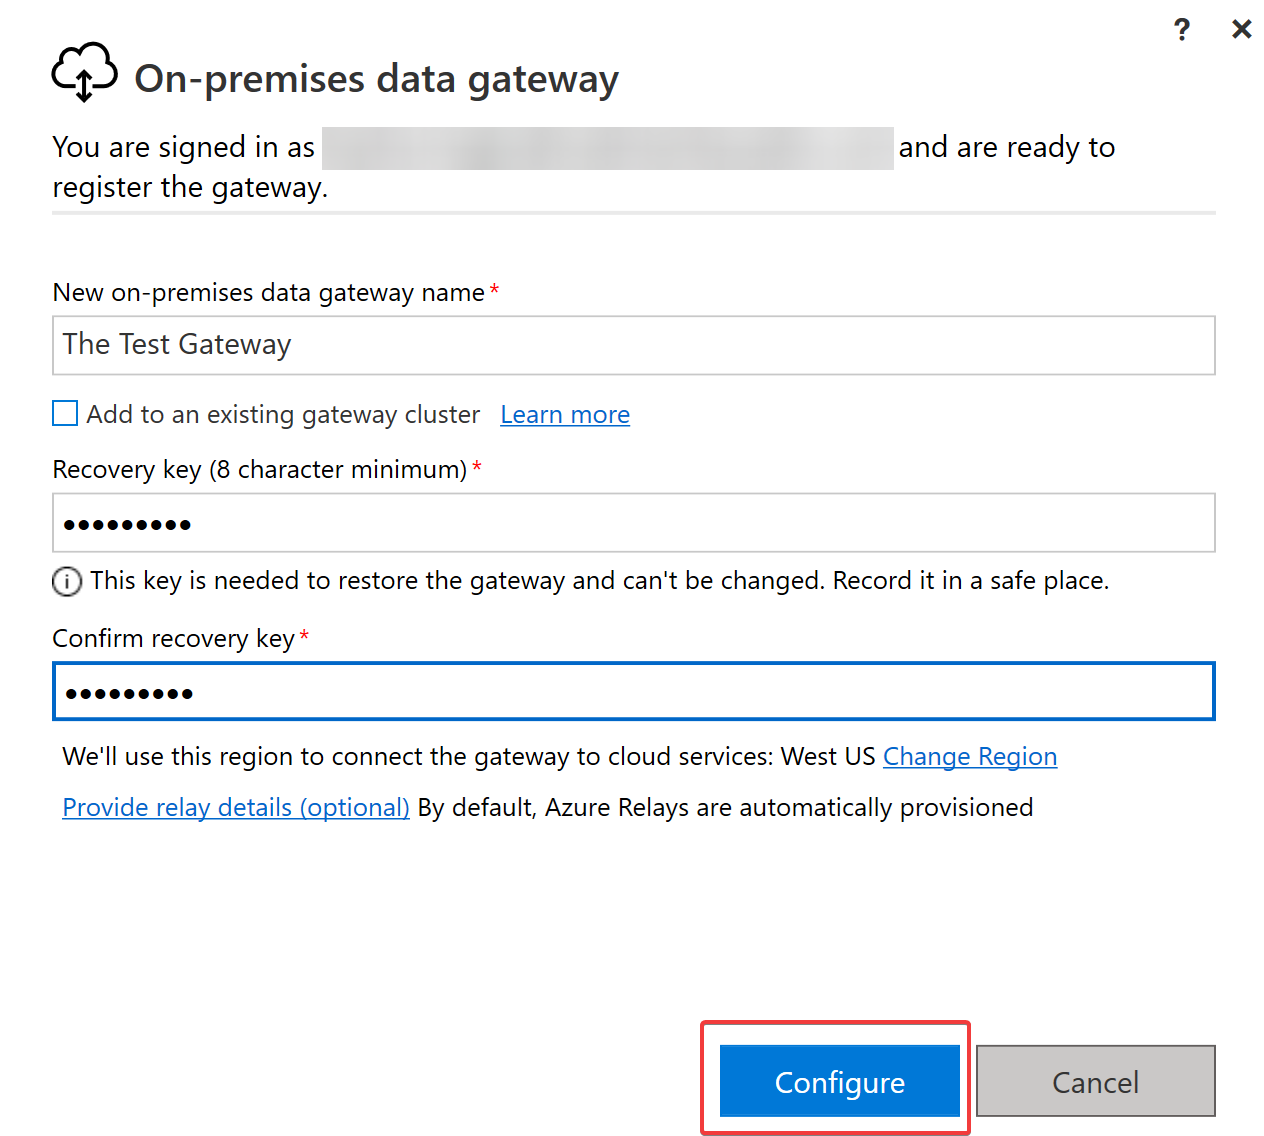 Configuring the new on-premises data gateway